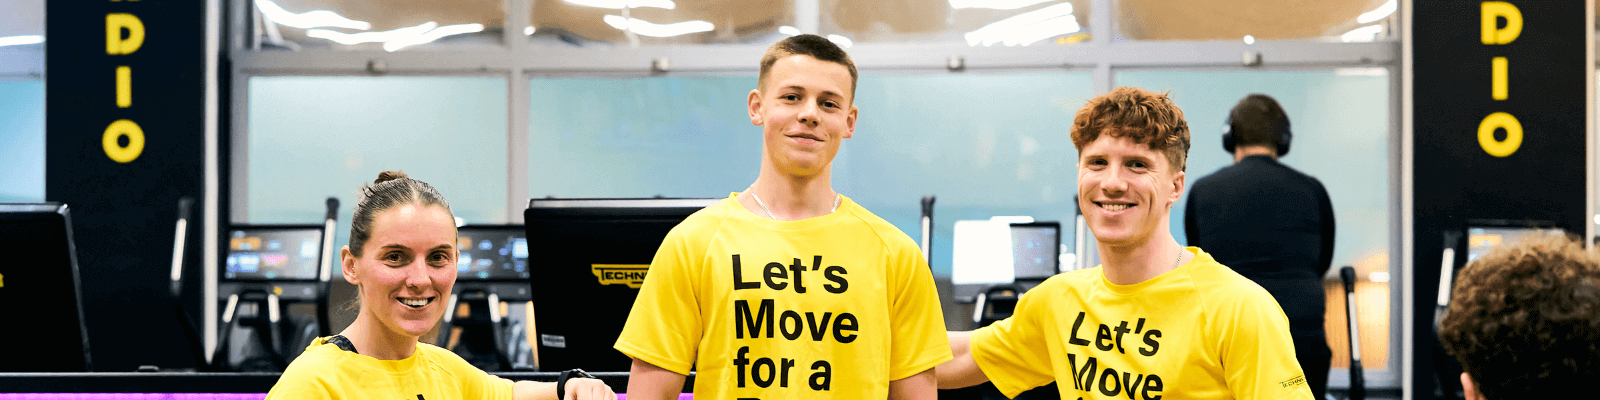 3 people in yellow lets move for a better world t-shirts